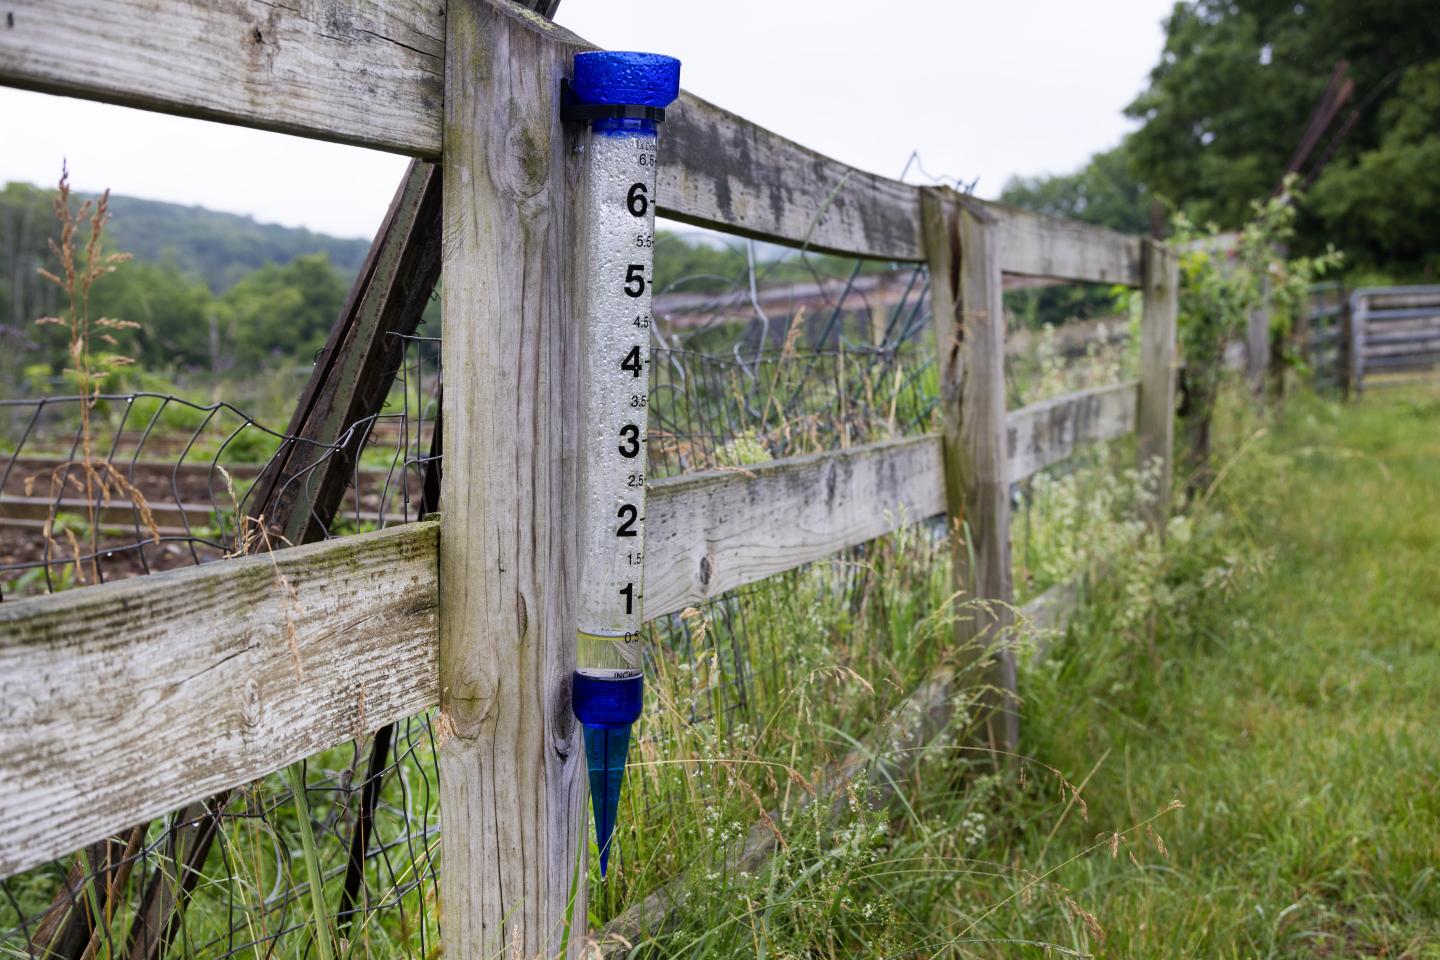 A rain gauge attached to a wooden fence